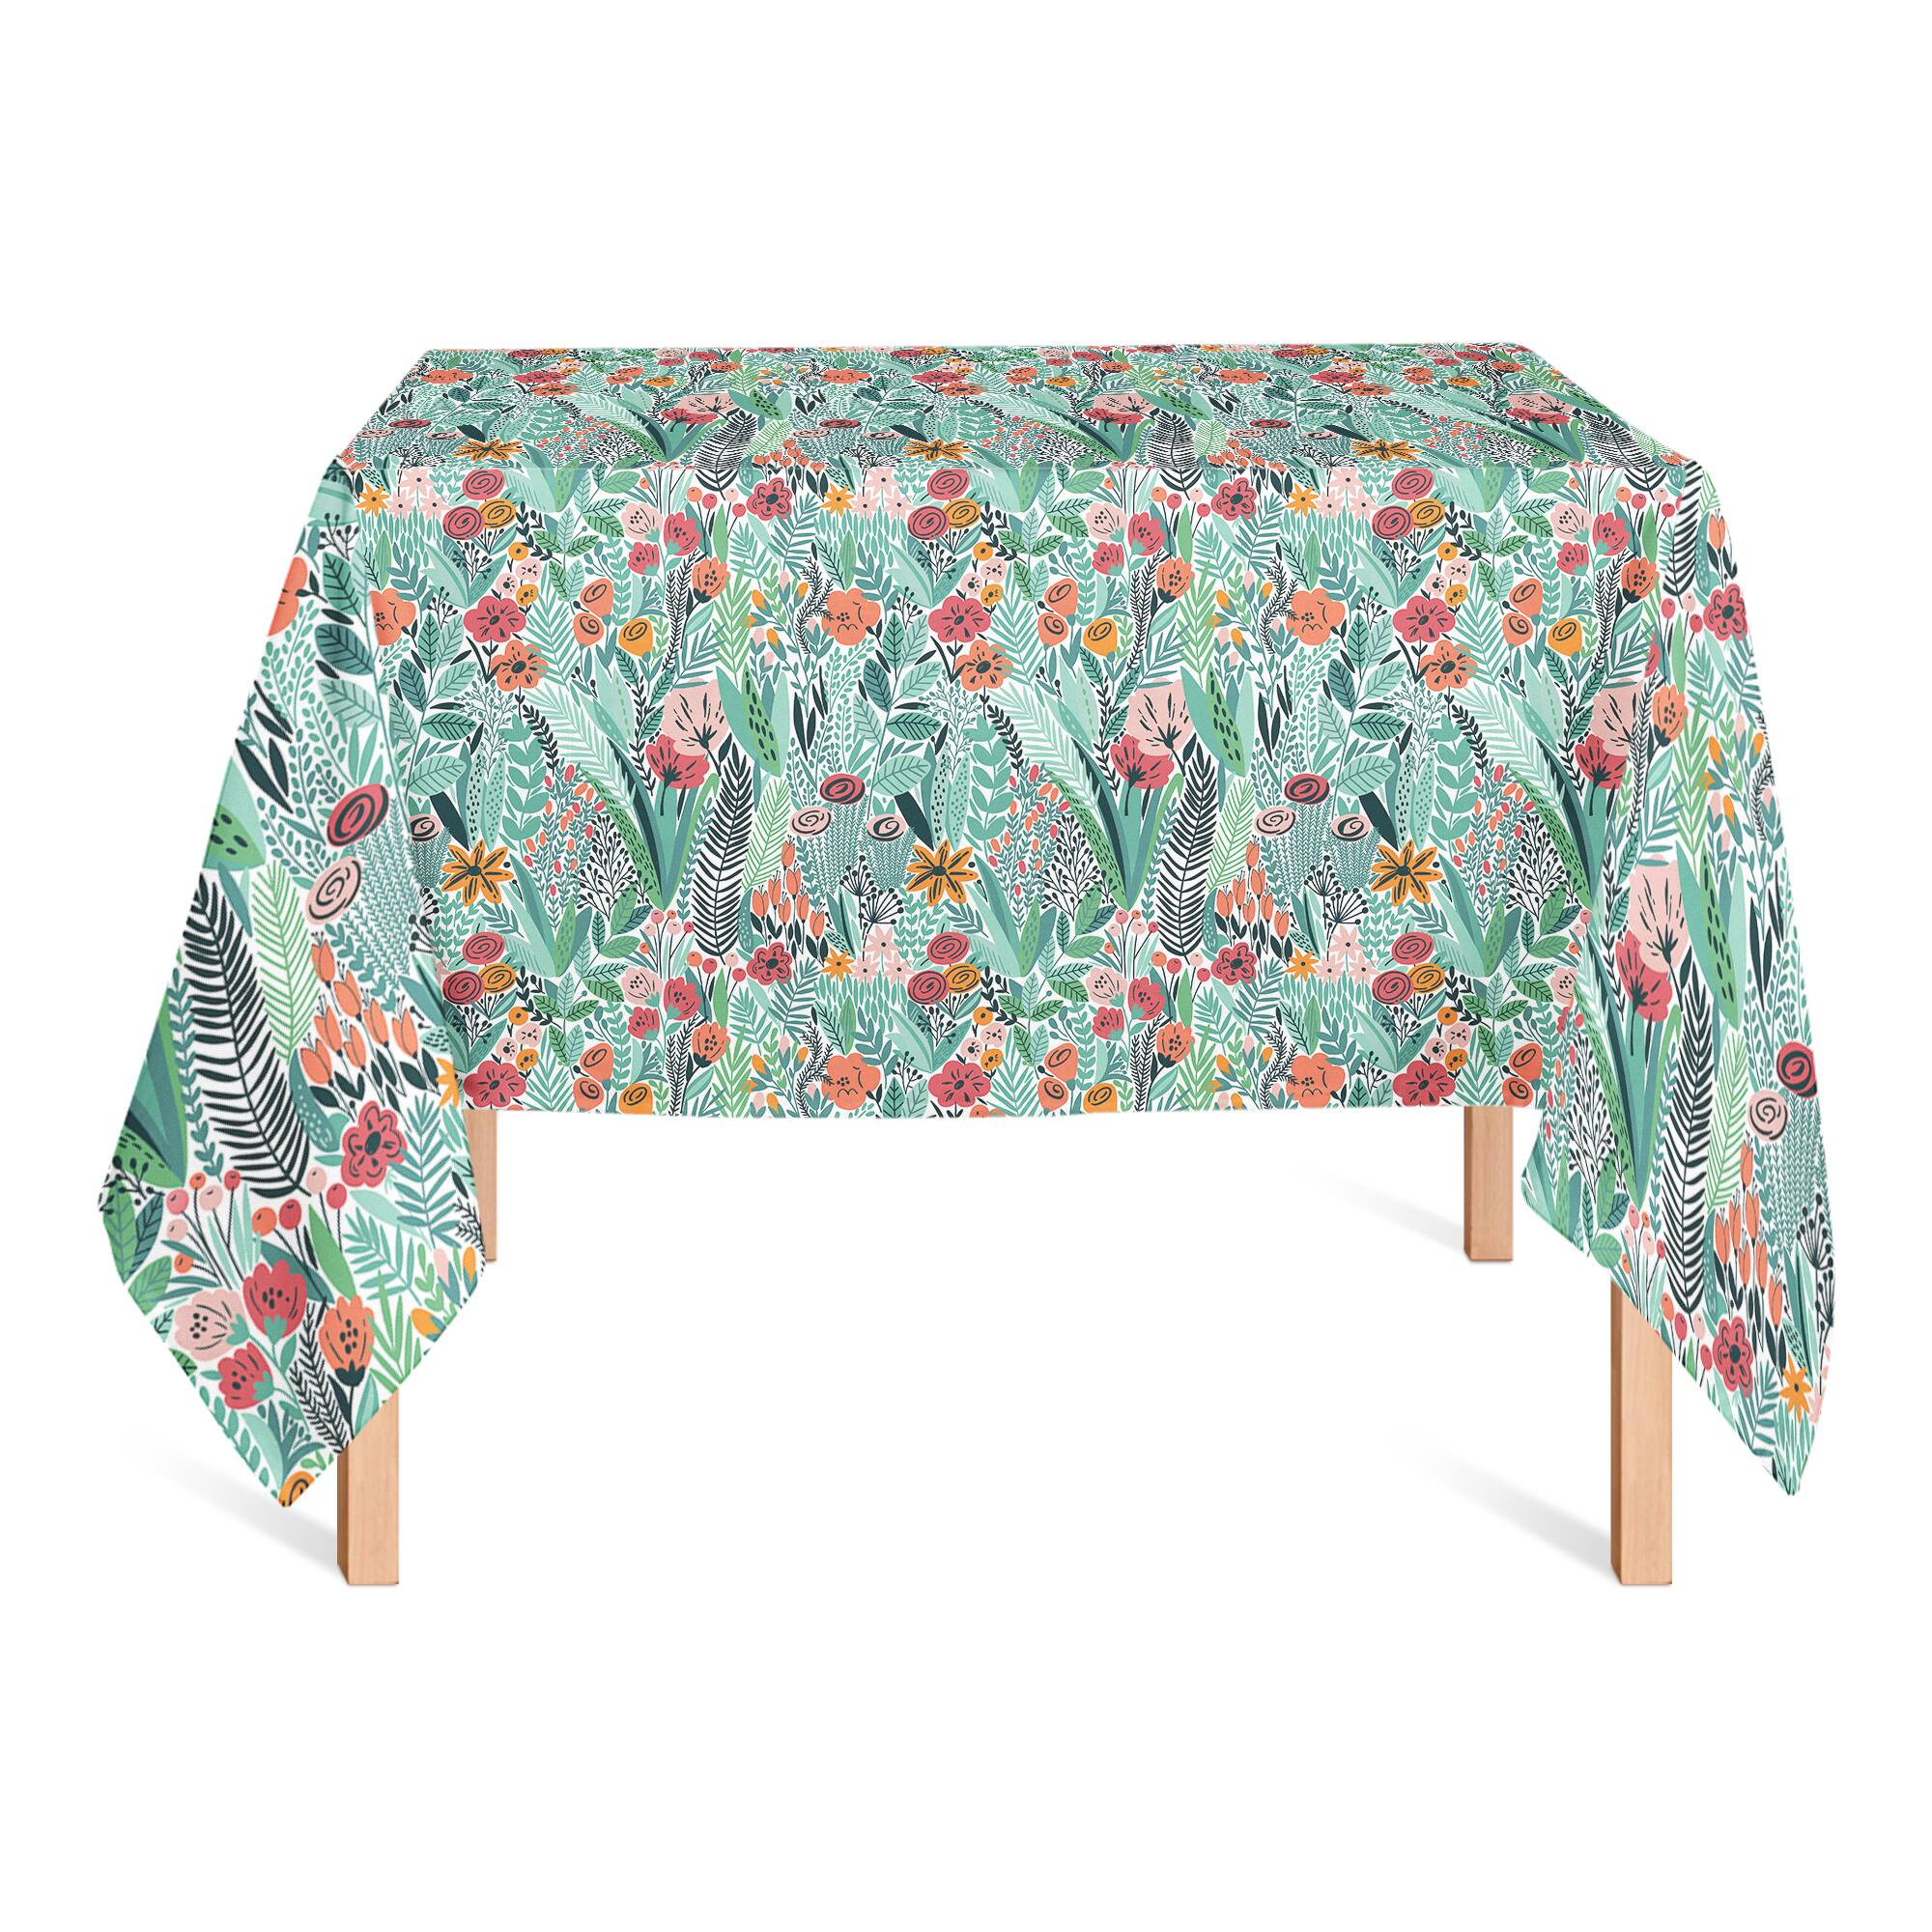 Lush Floral Pattern Tablecloth